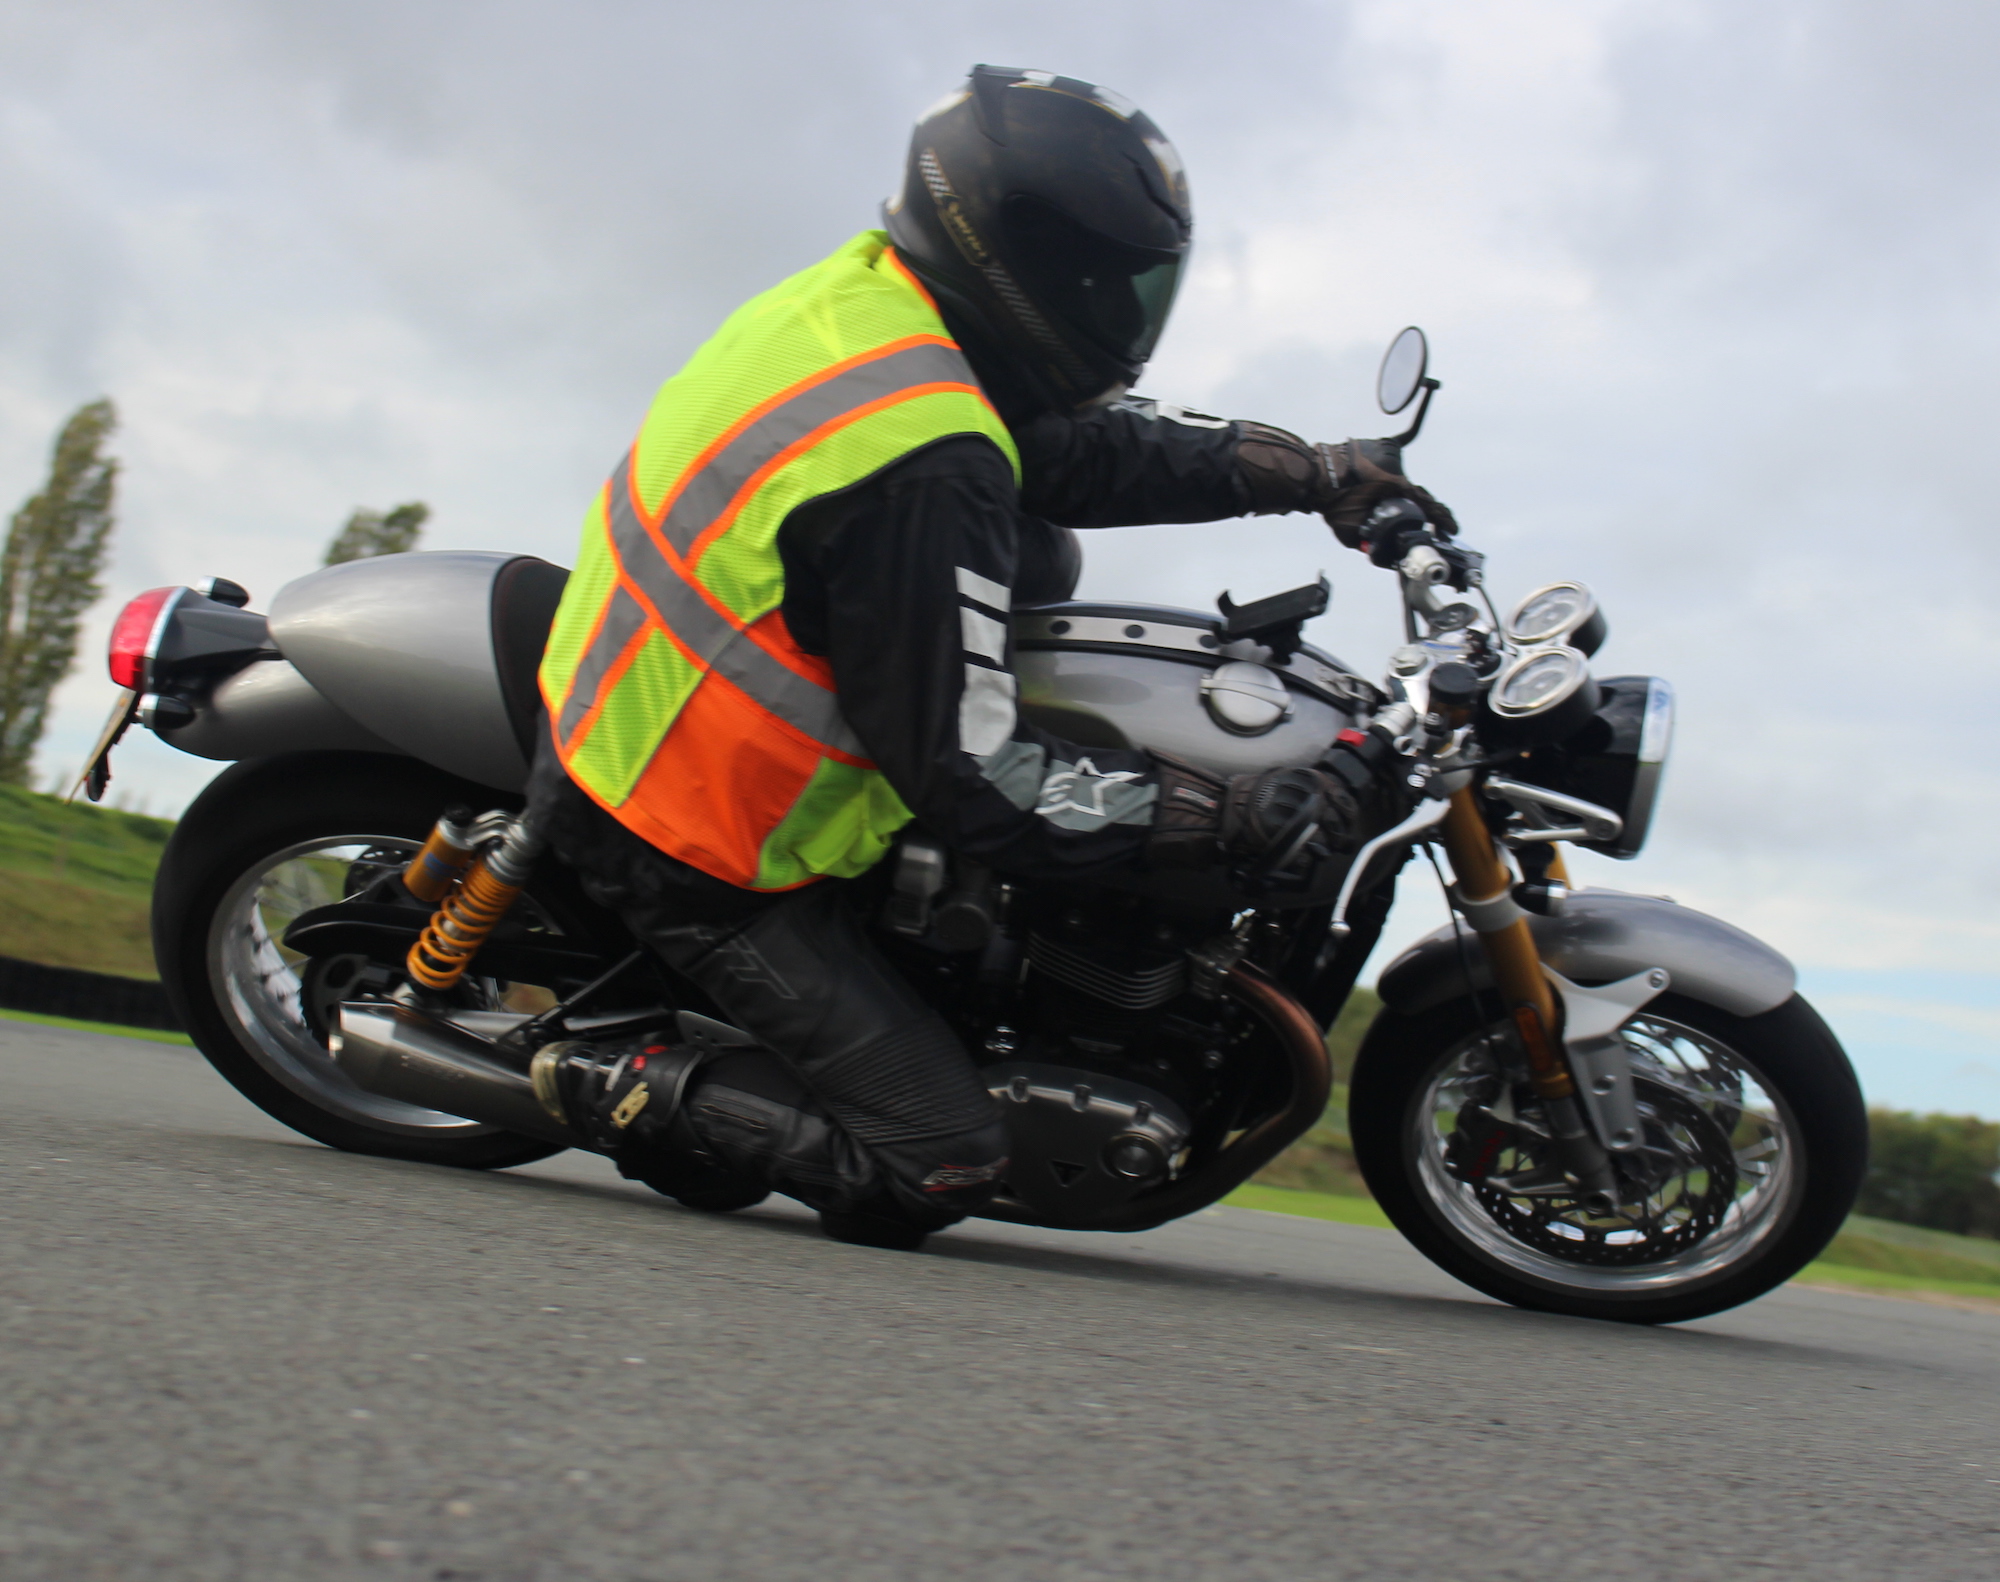 Direct Access motorcycle training in London, Southampton 